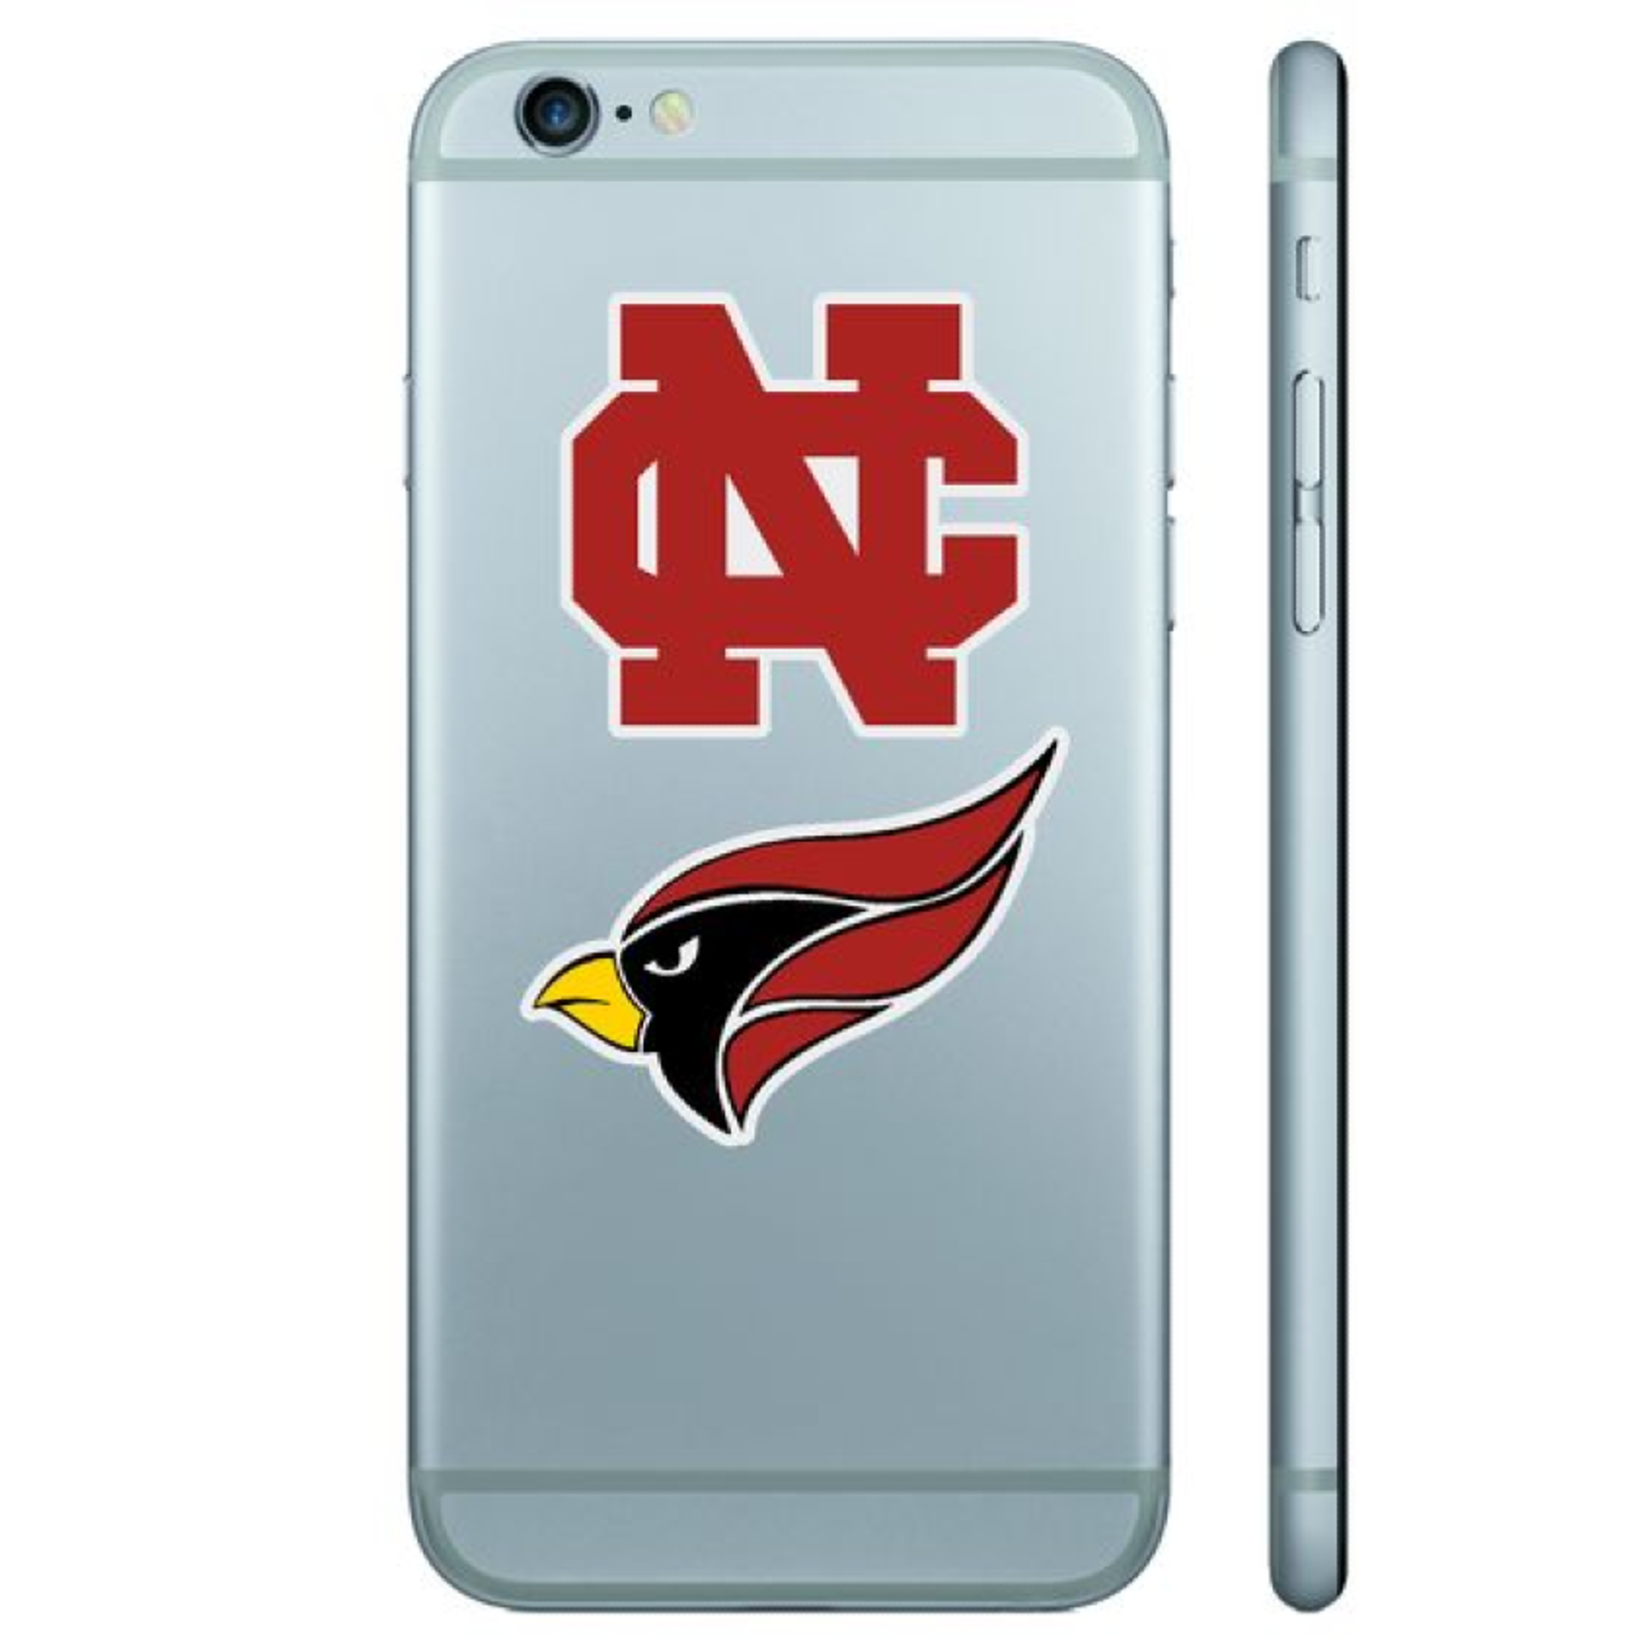 CDI Corporation North Central College Mini NC & Cardinal Head Decal Pack